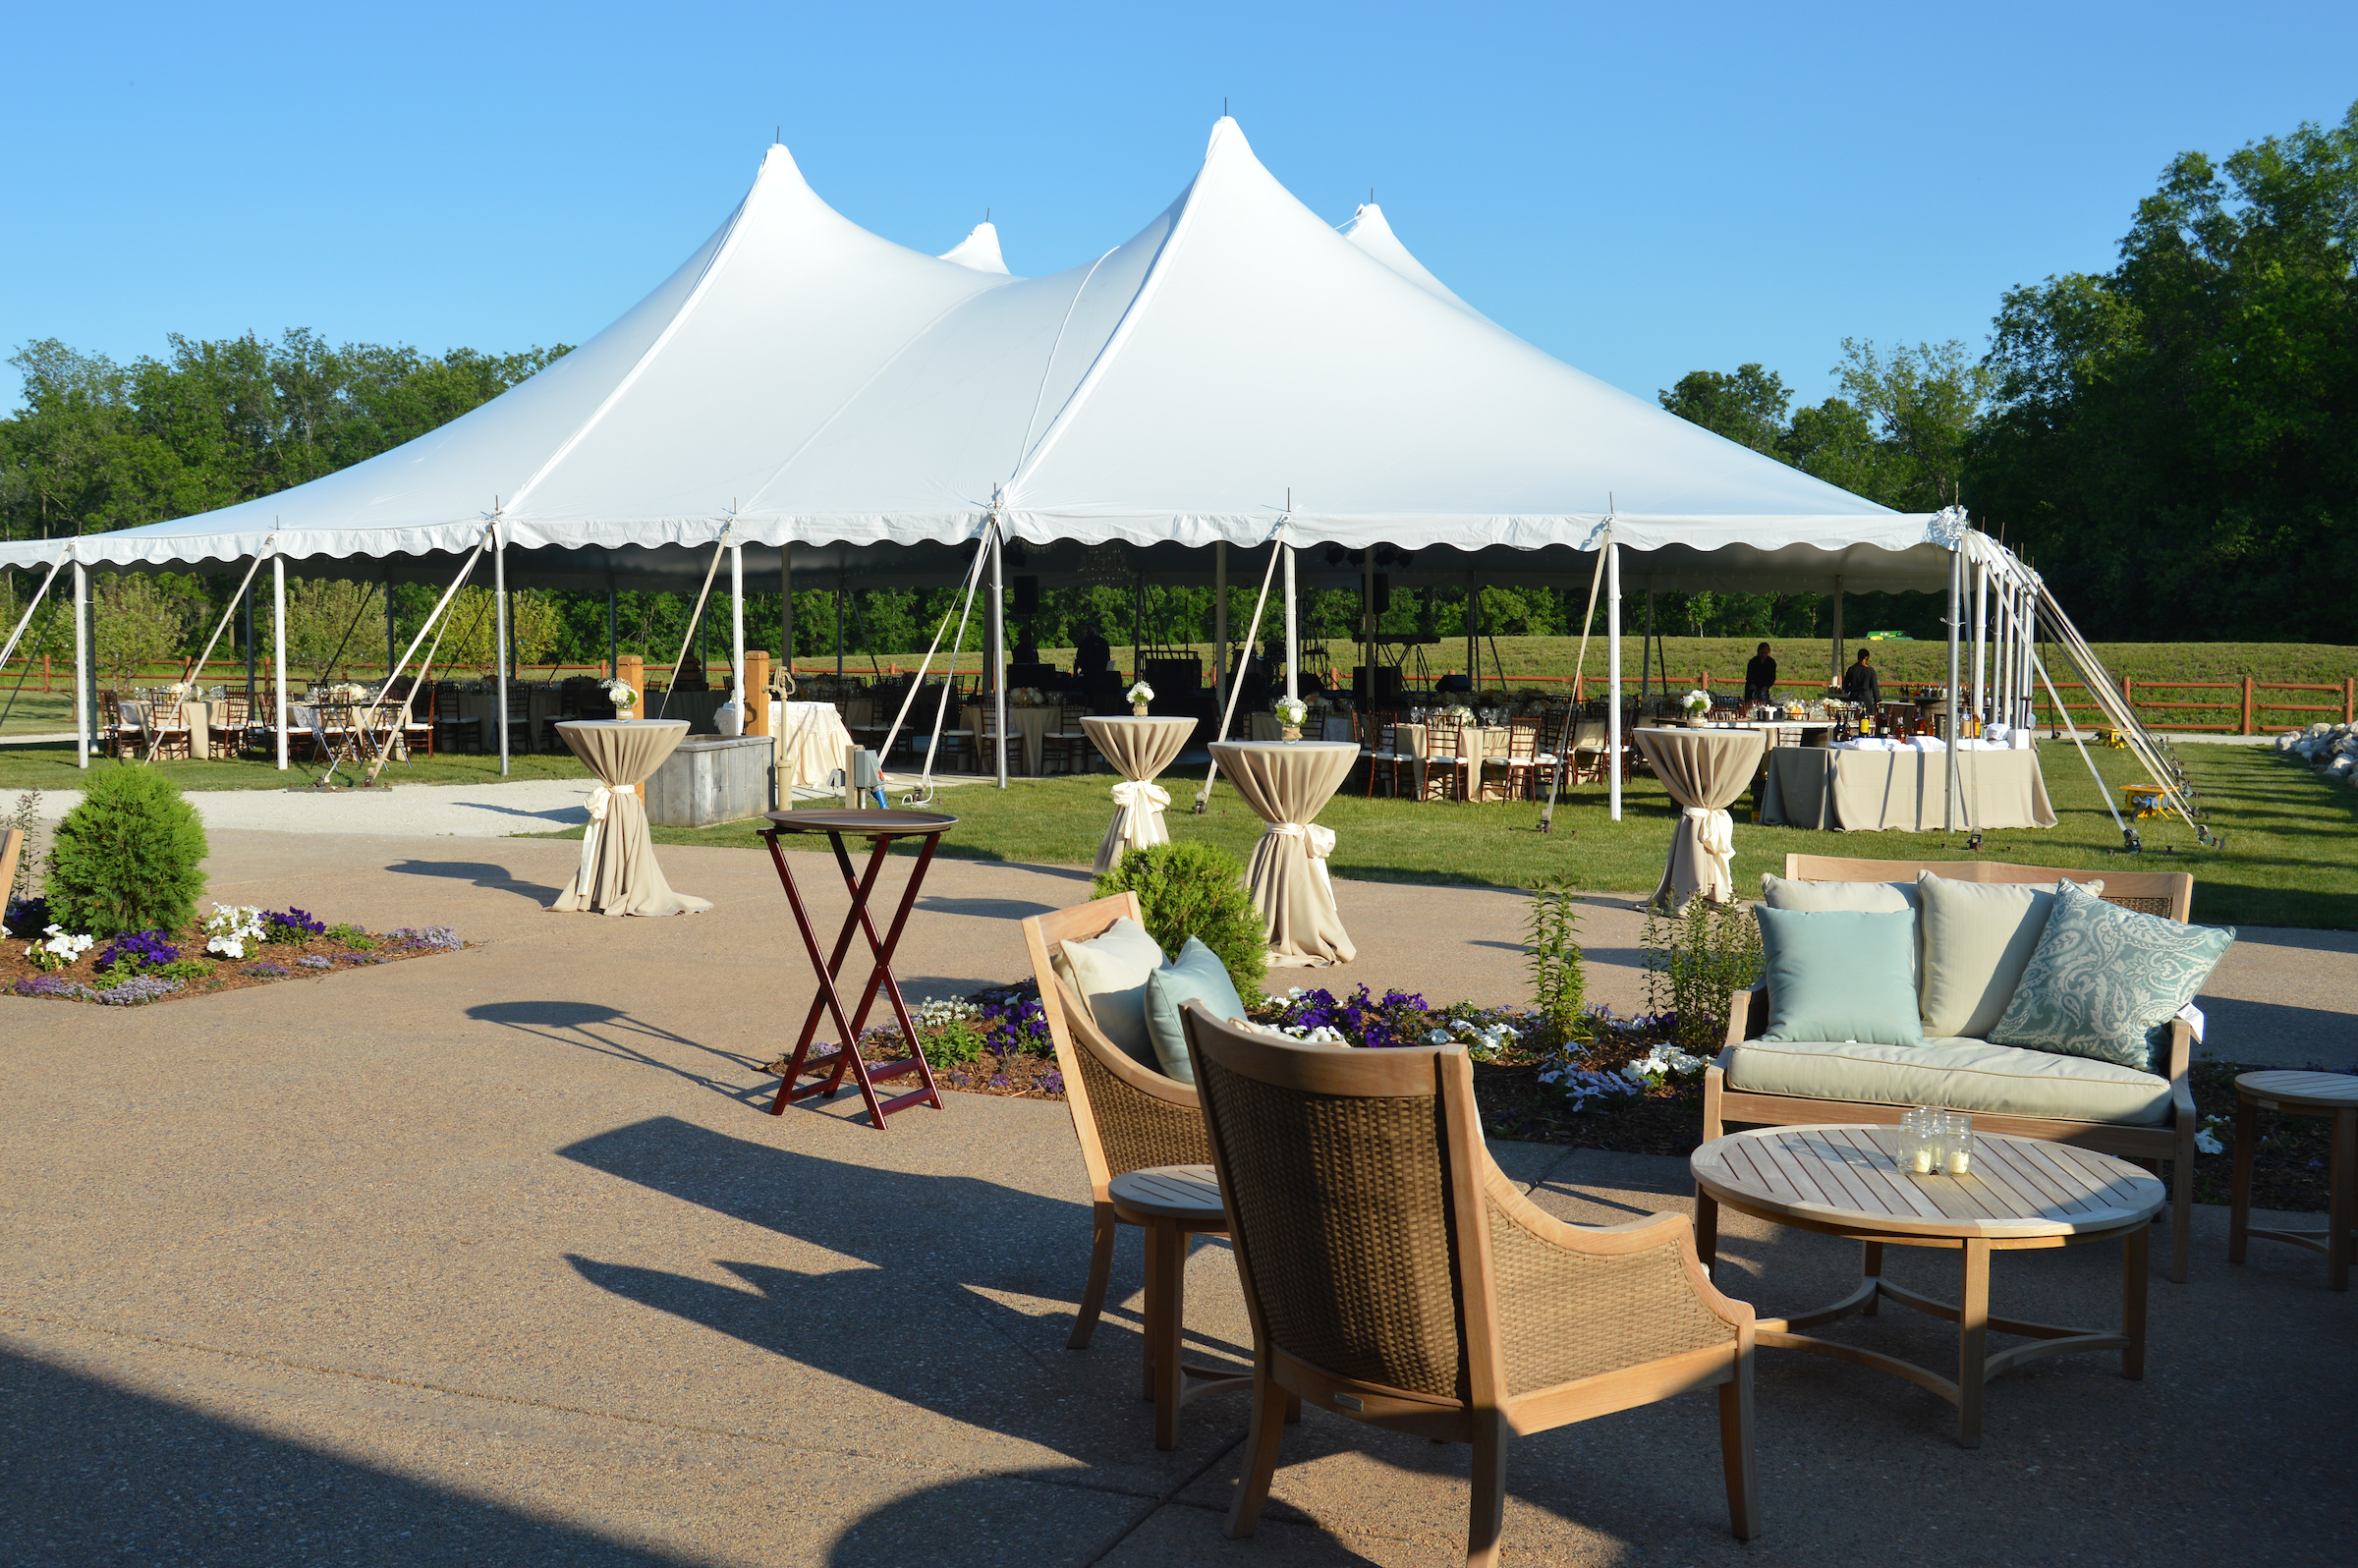 The Lawn set up with outdoor furniture with teal and beige colors, along with a tent that is set up with tables and chairs under it.